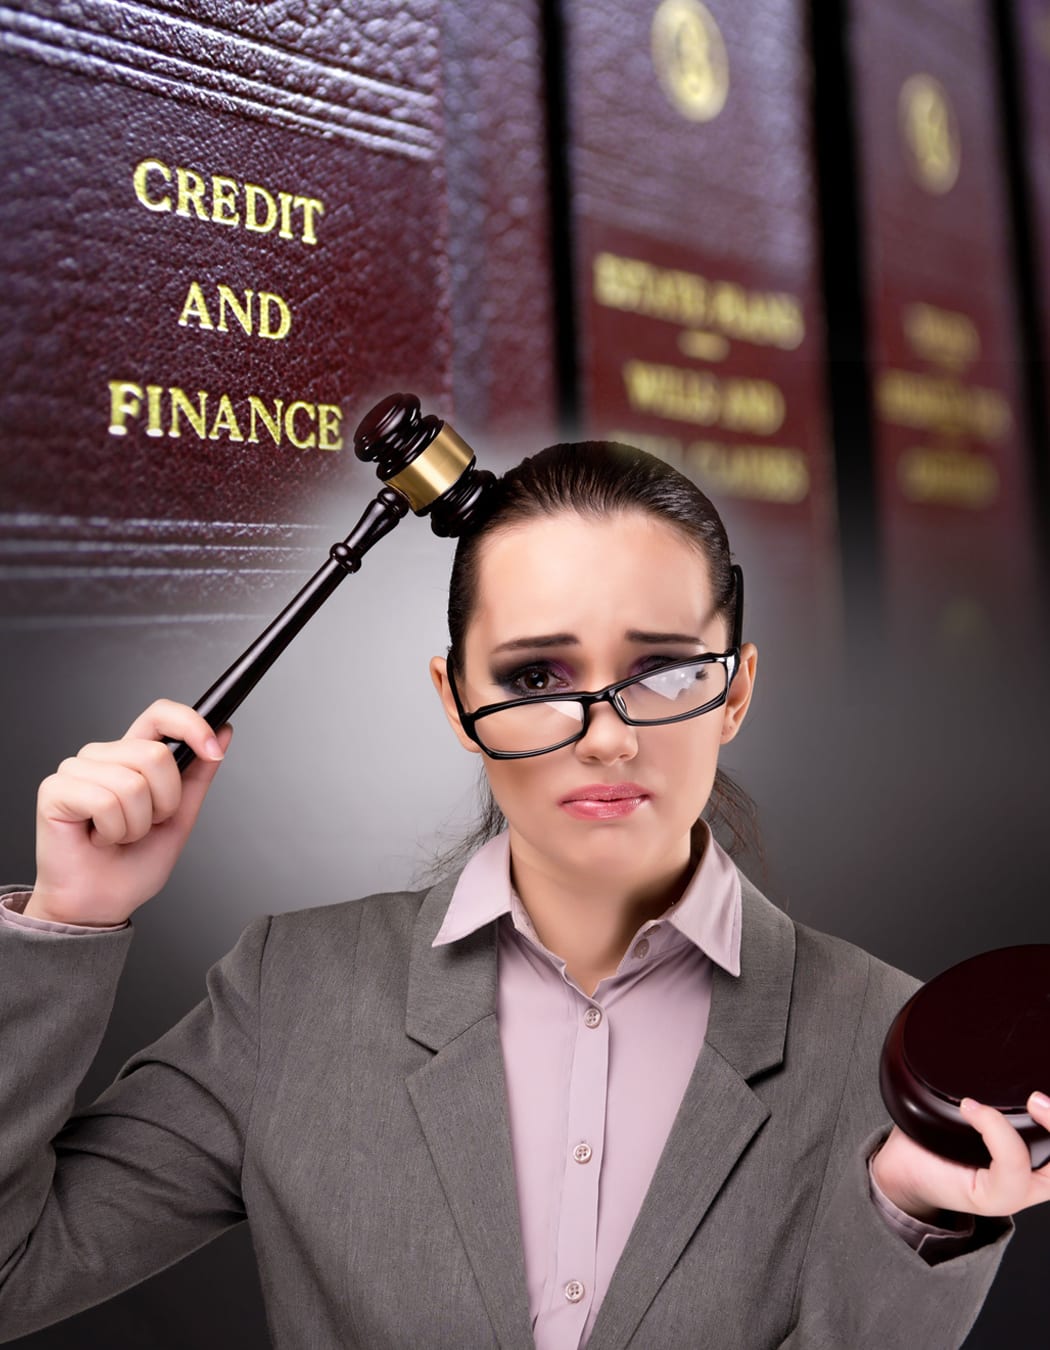 Humorous image of lawyer hitting herslef in head with gavel with Finance Law books in background